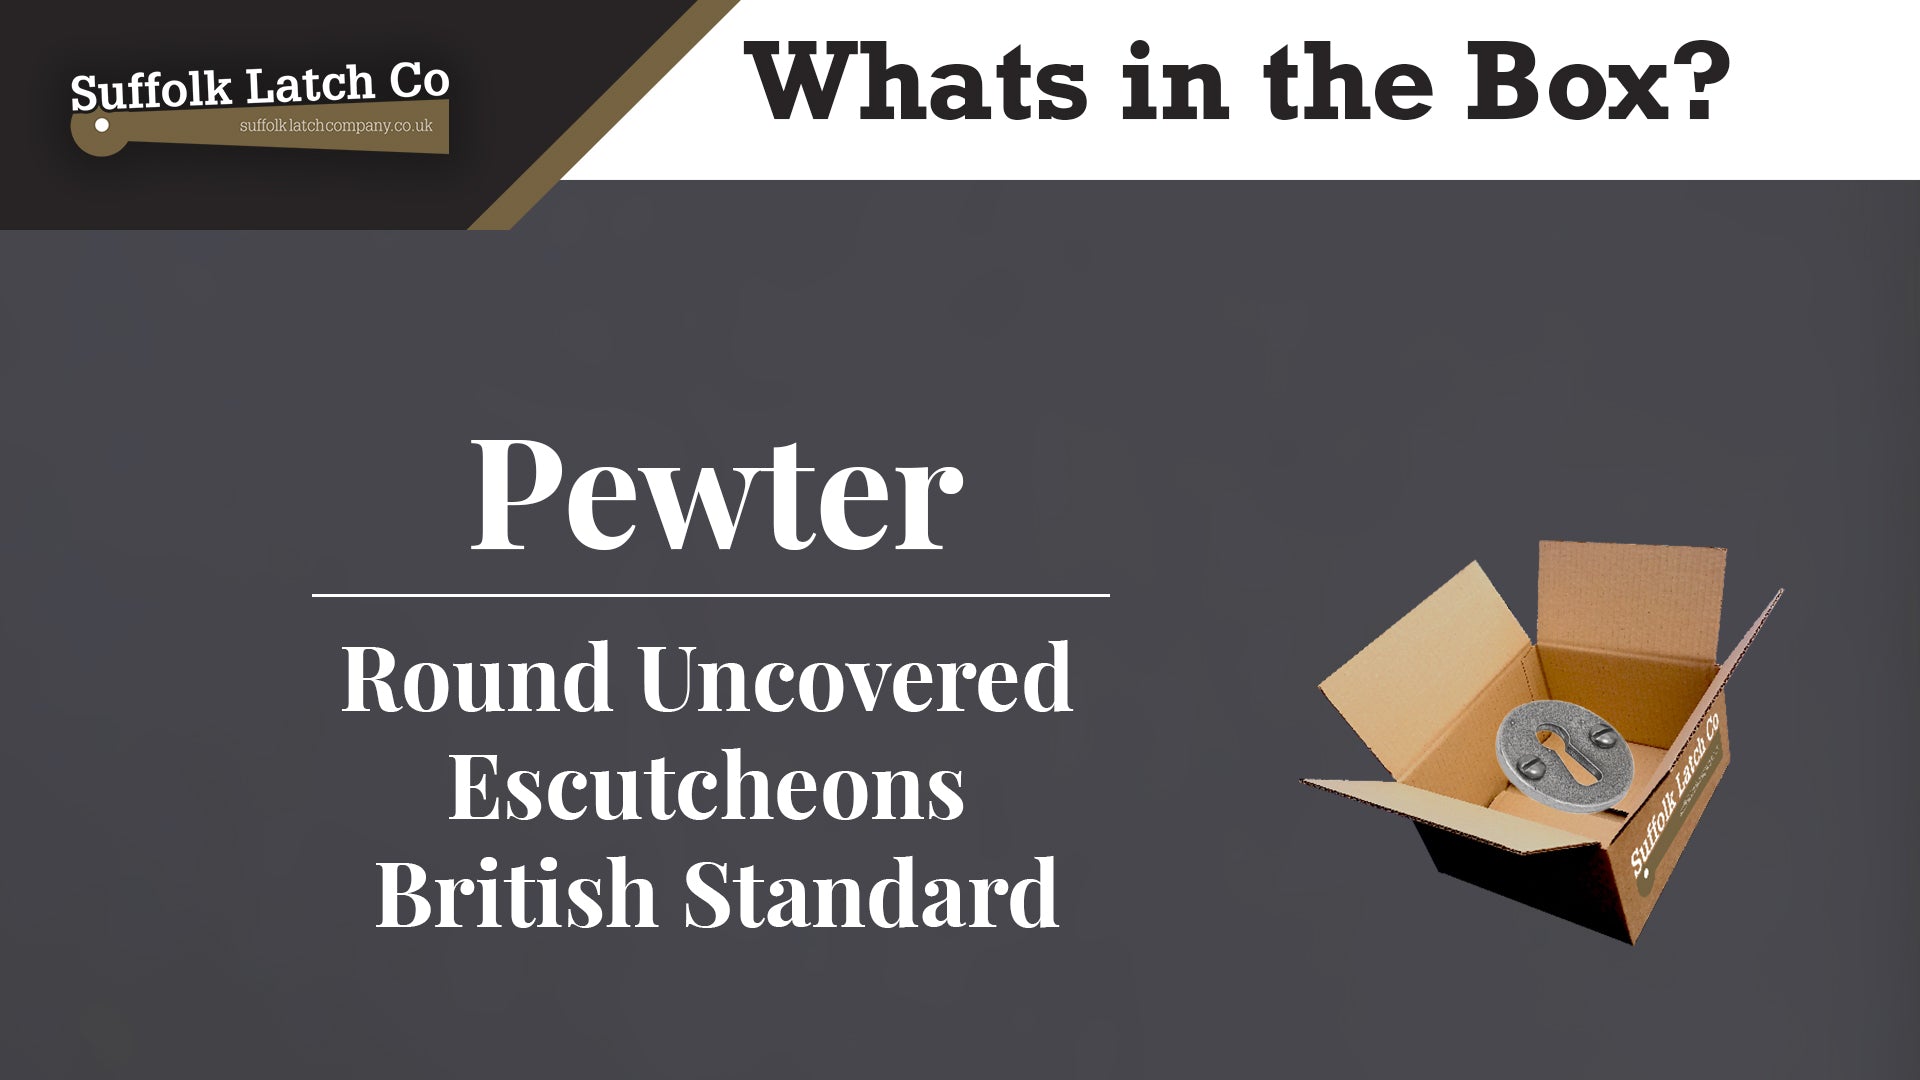 What's in the box? Round Uncovered Escutcheons British Standard